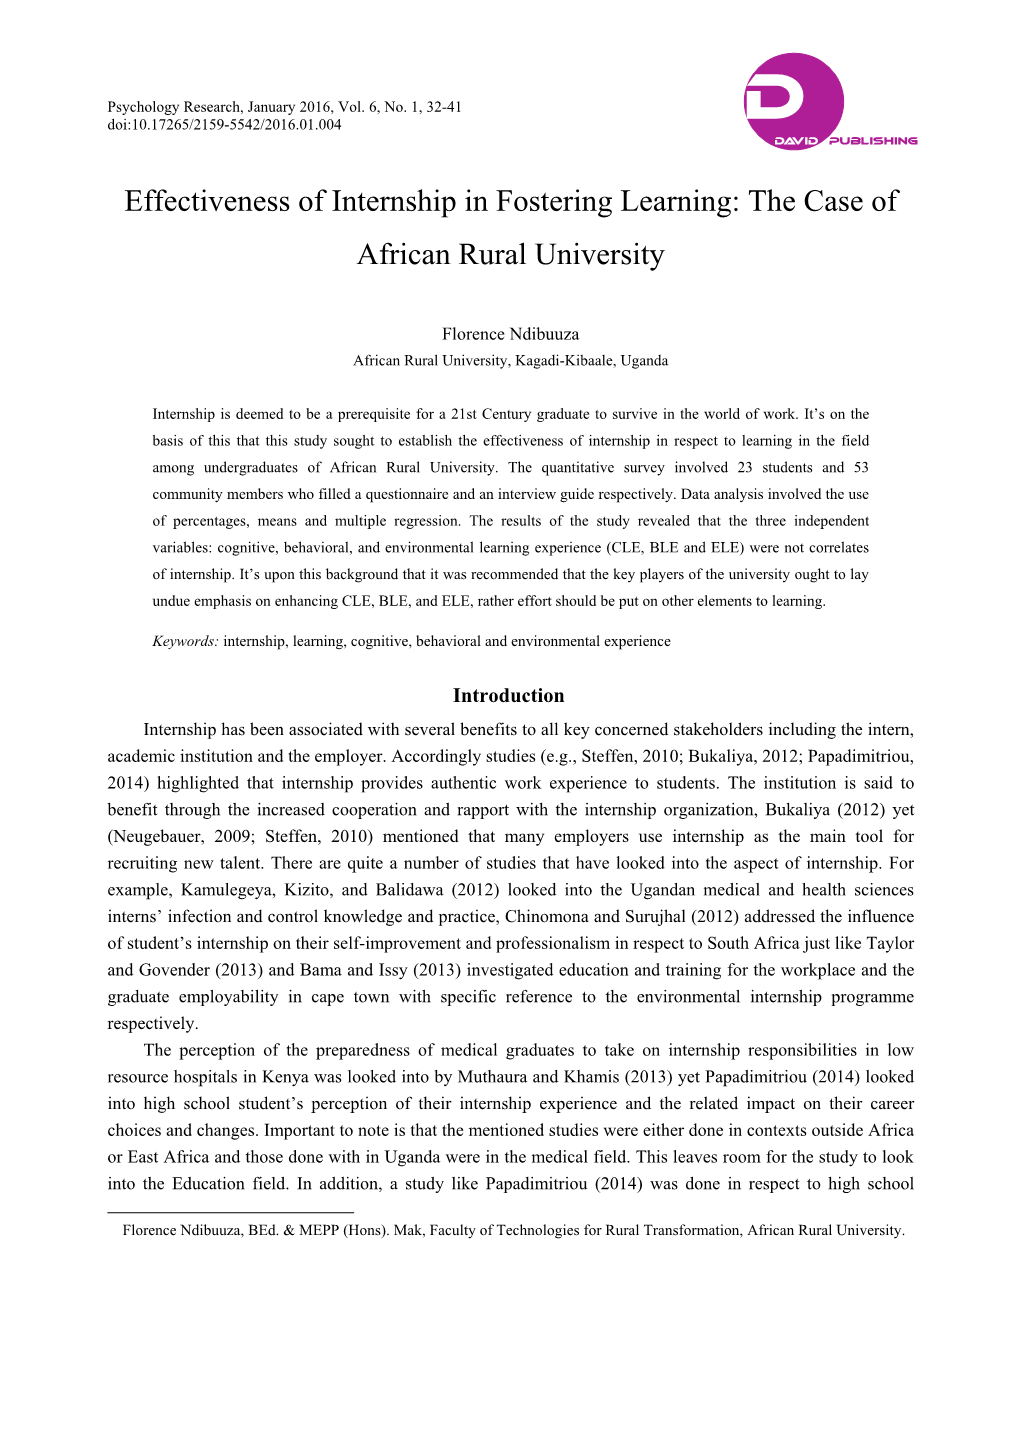 Effectiveness of Internship in Fostering Learning: the Case of African Rural University